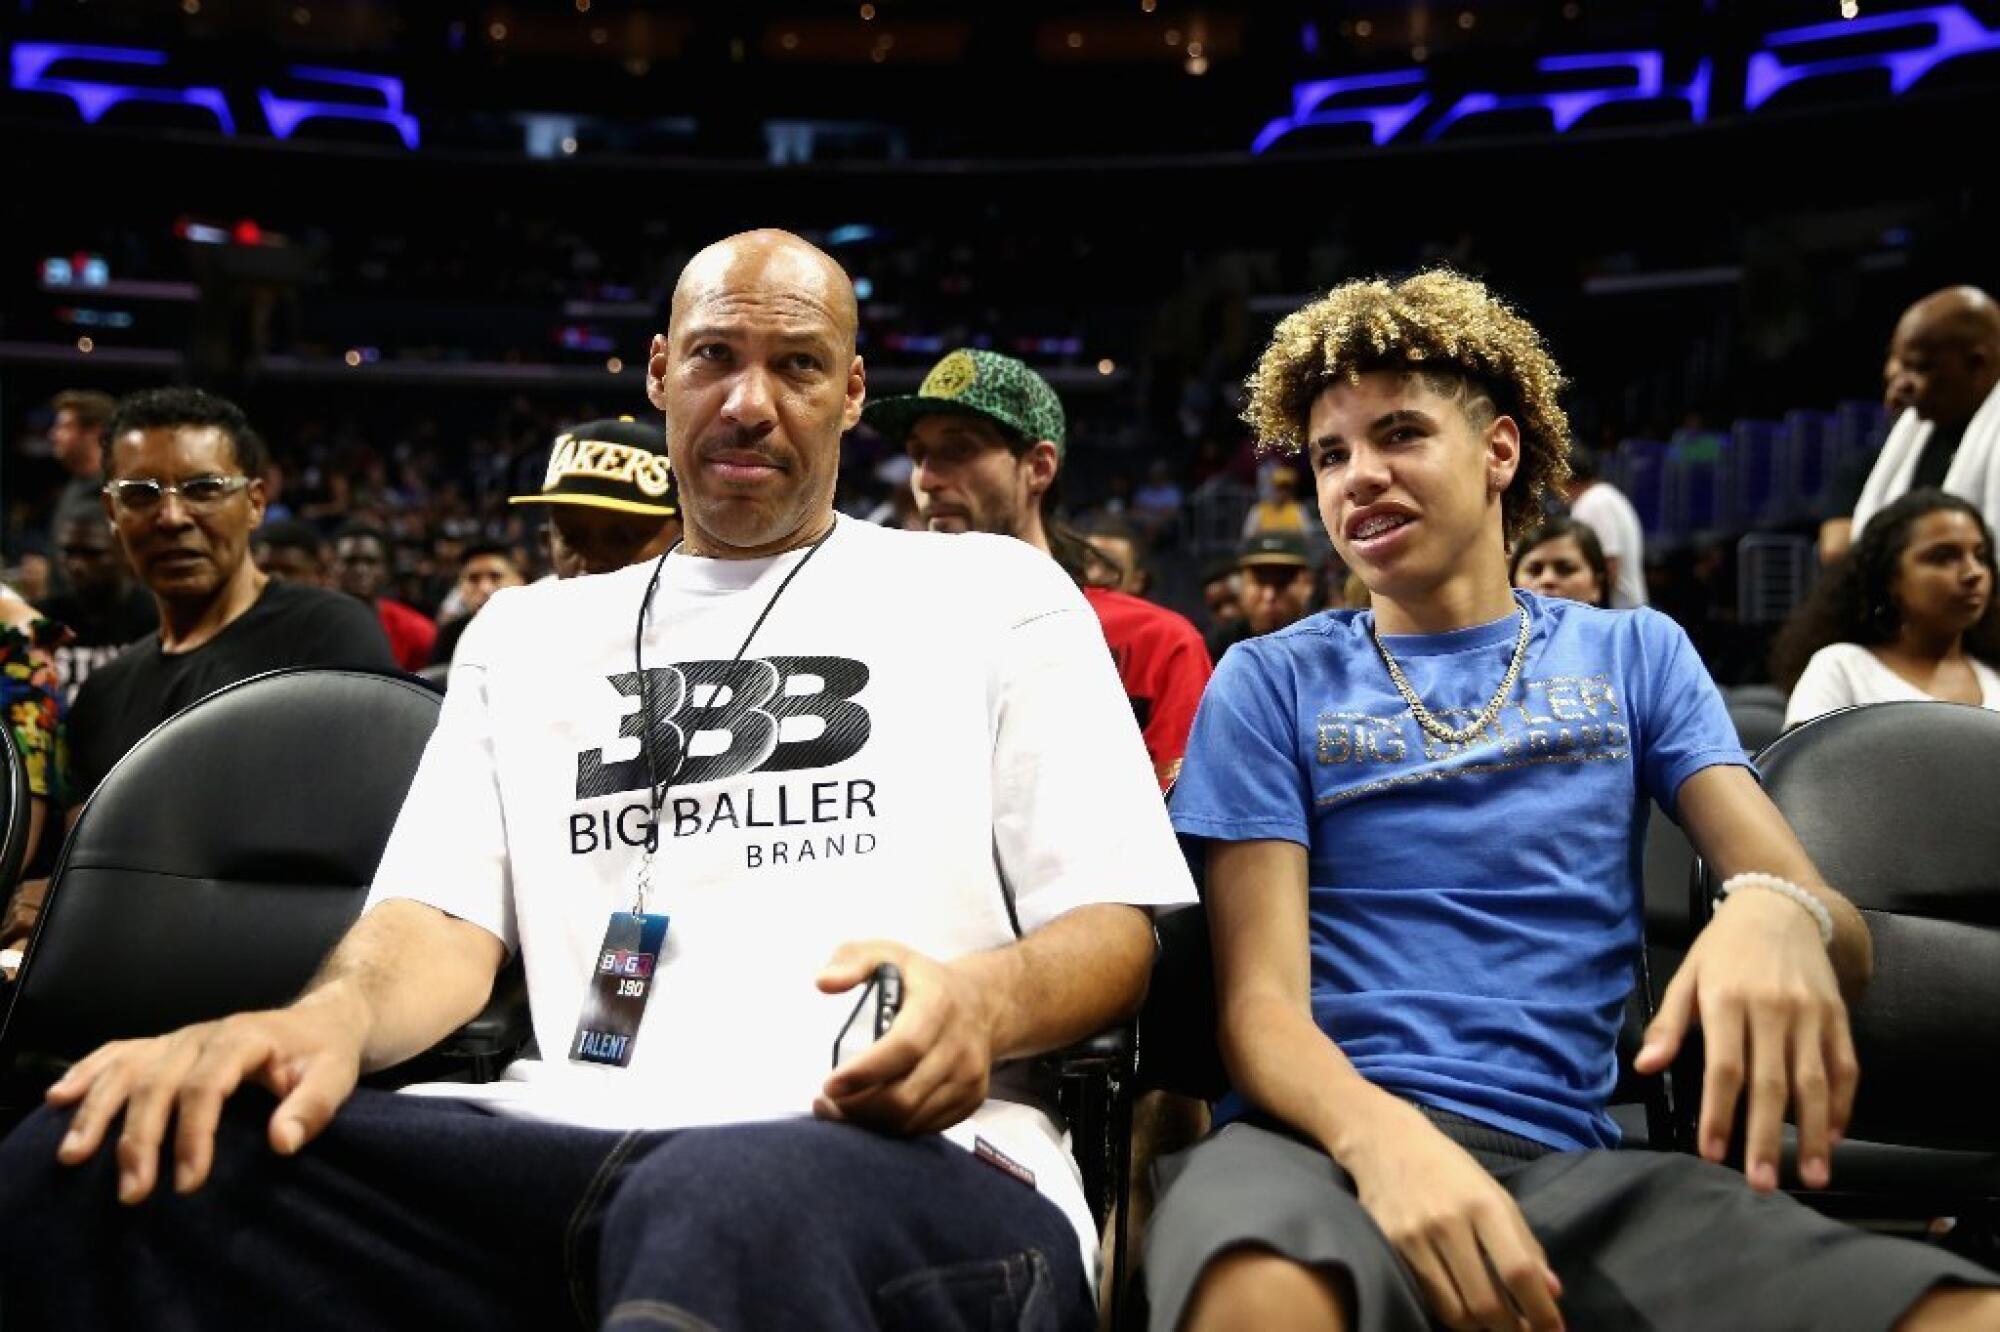 LaVar Ball and son LaMelo look on from the crowd during a BIG3 game at Staples Center.